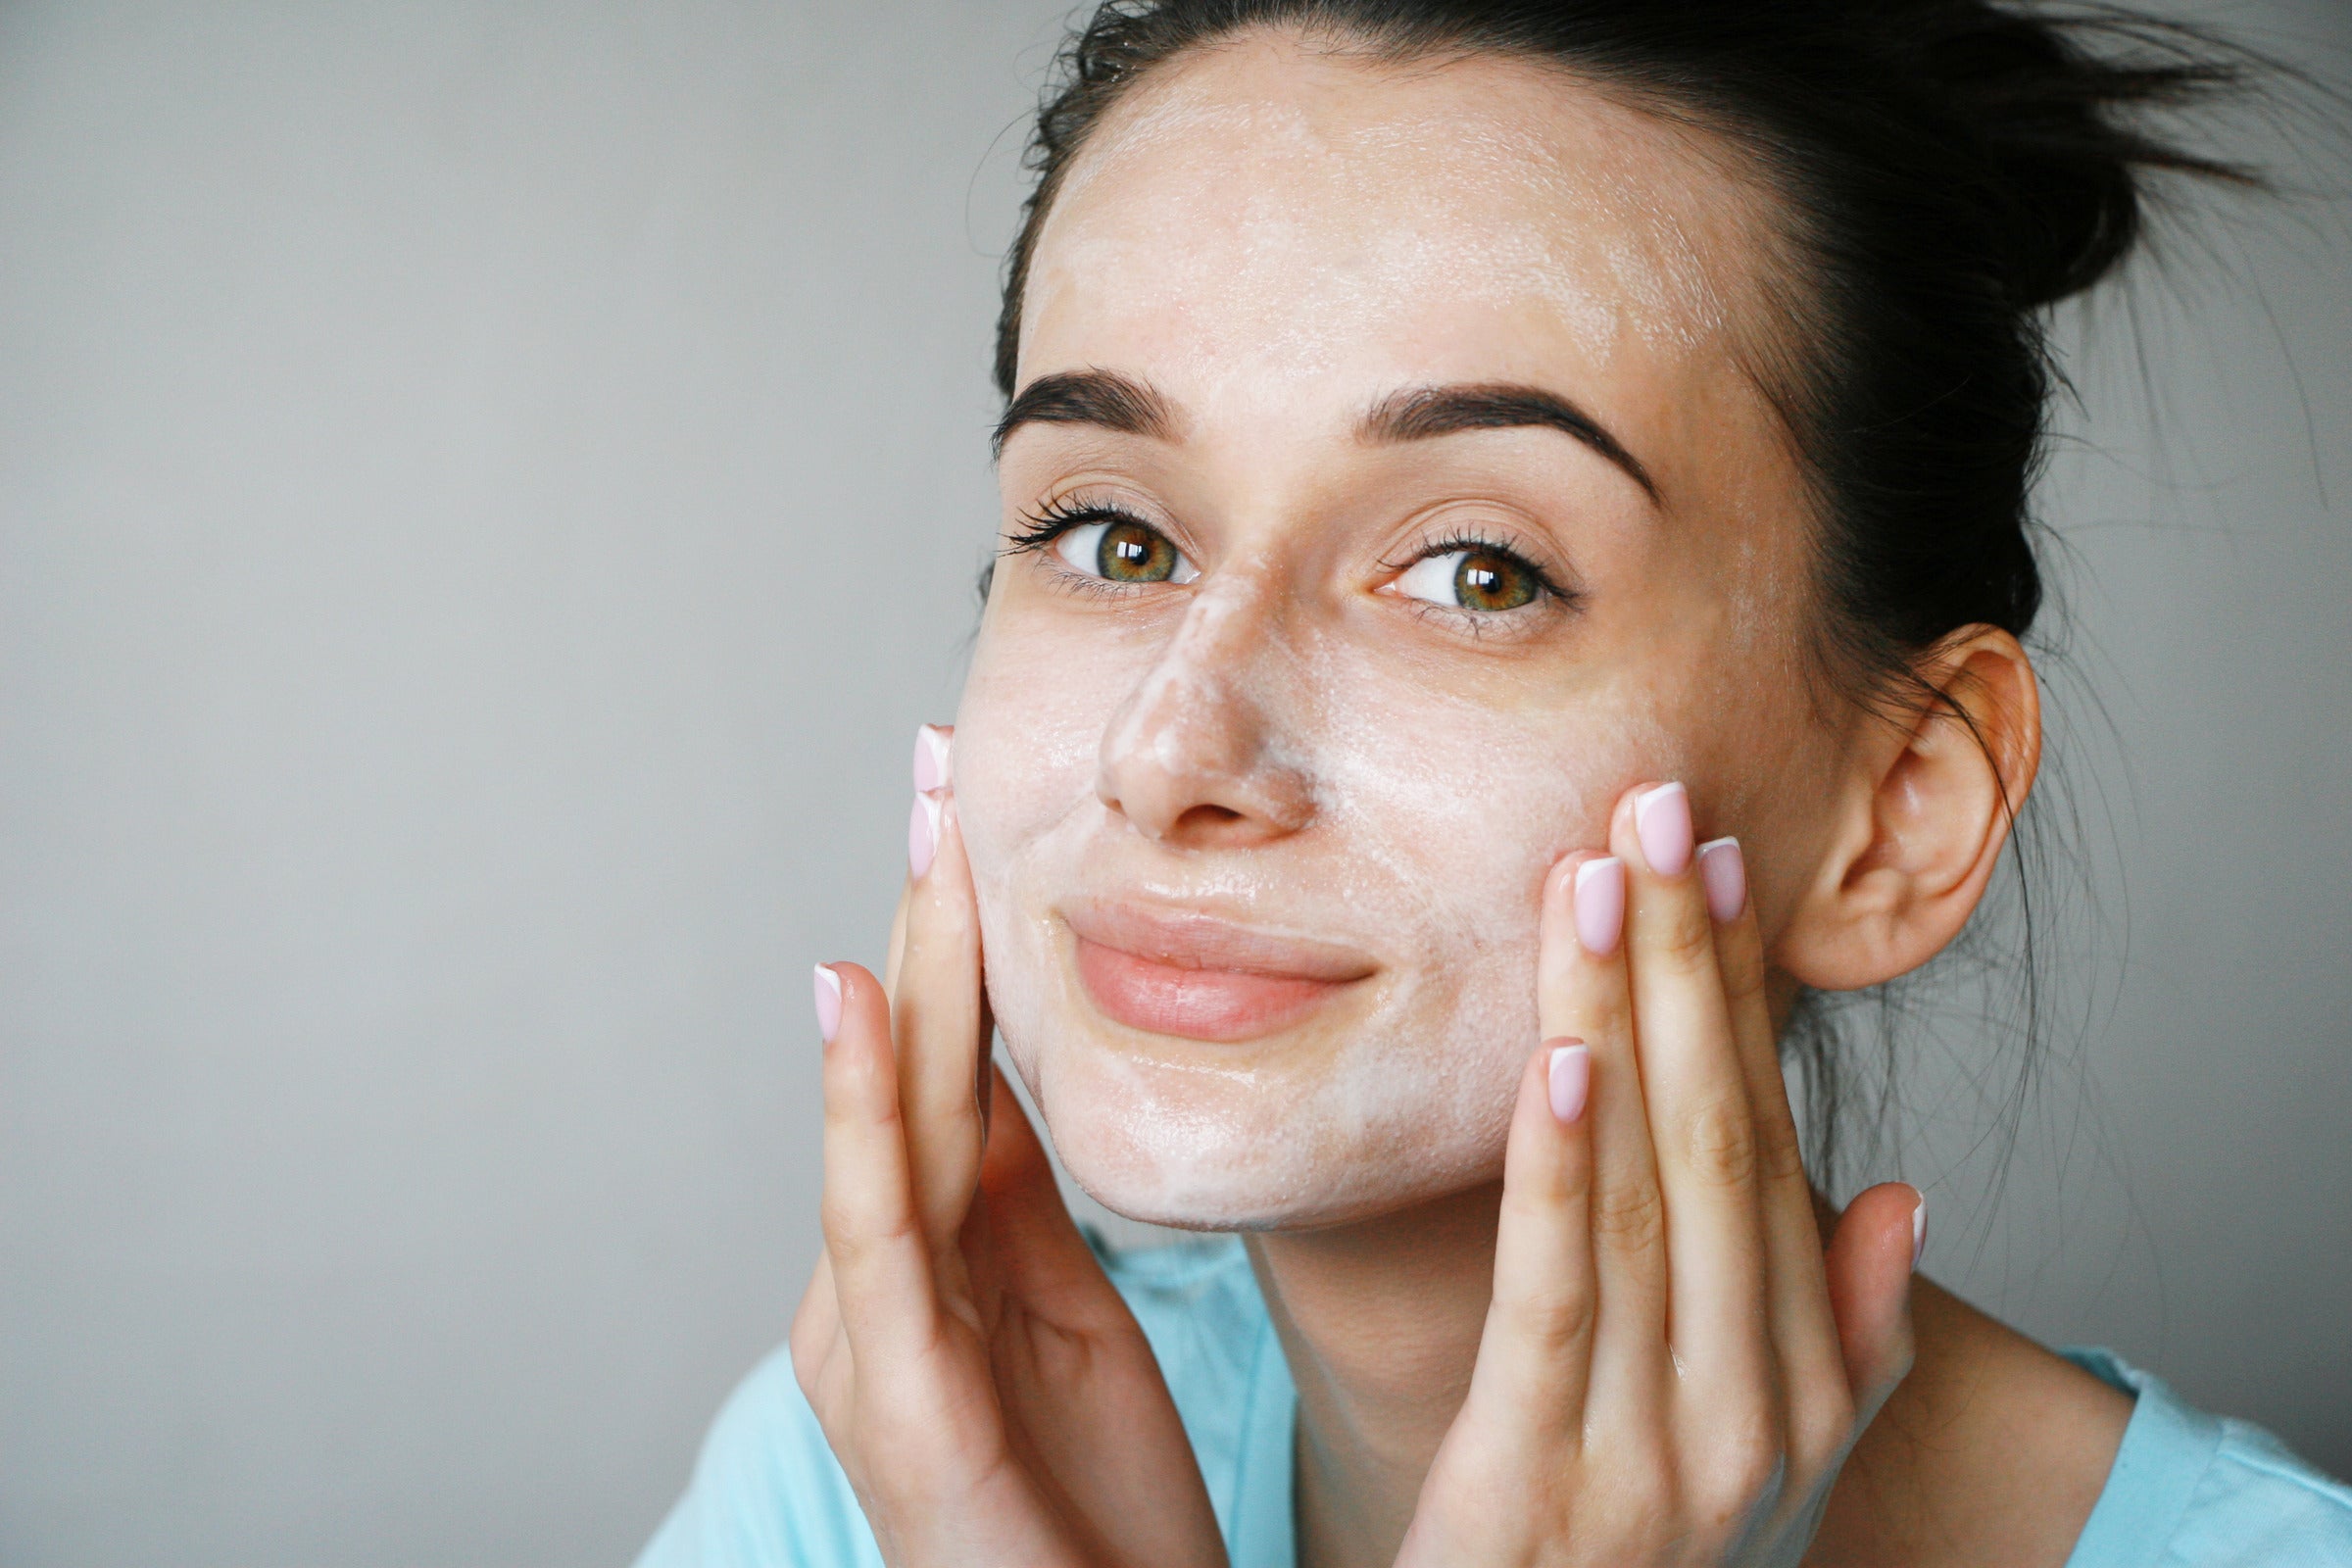 Irritated skin can be treated with milk compresses